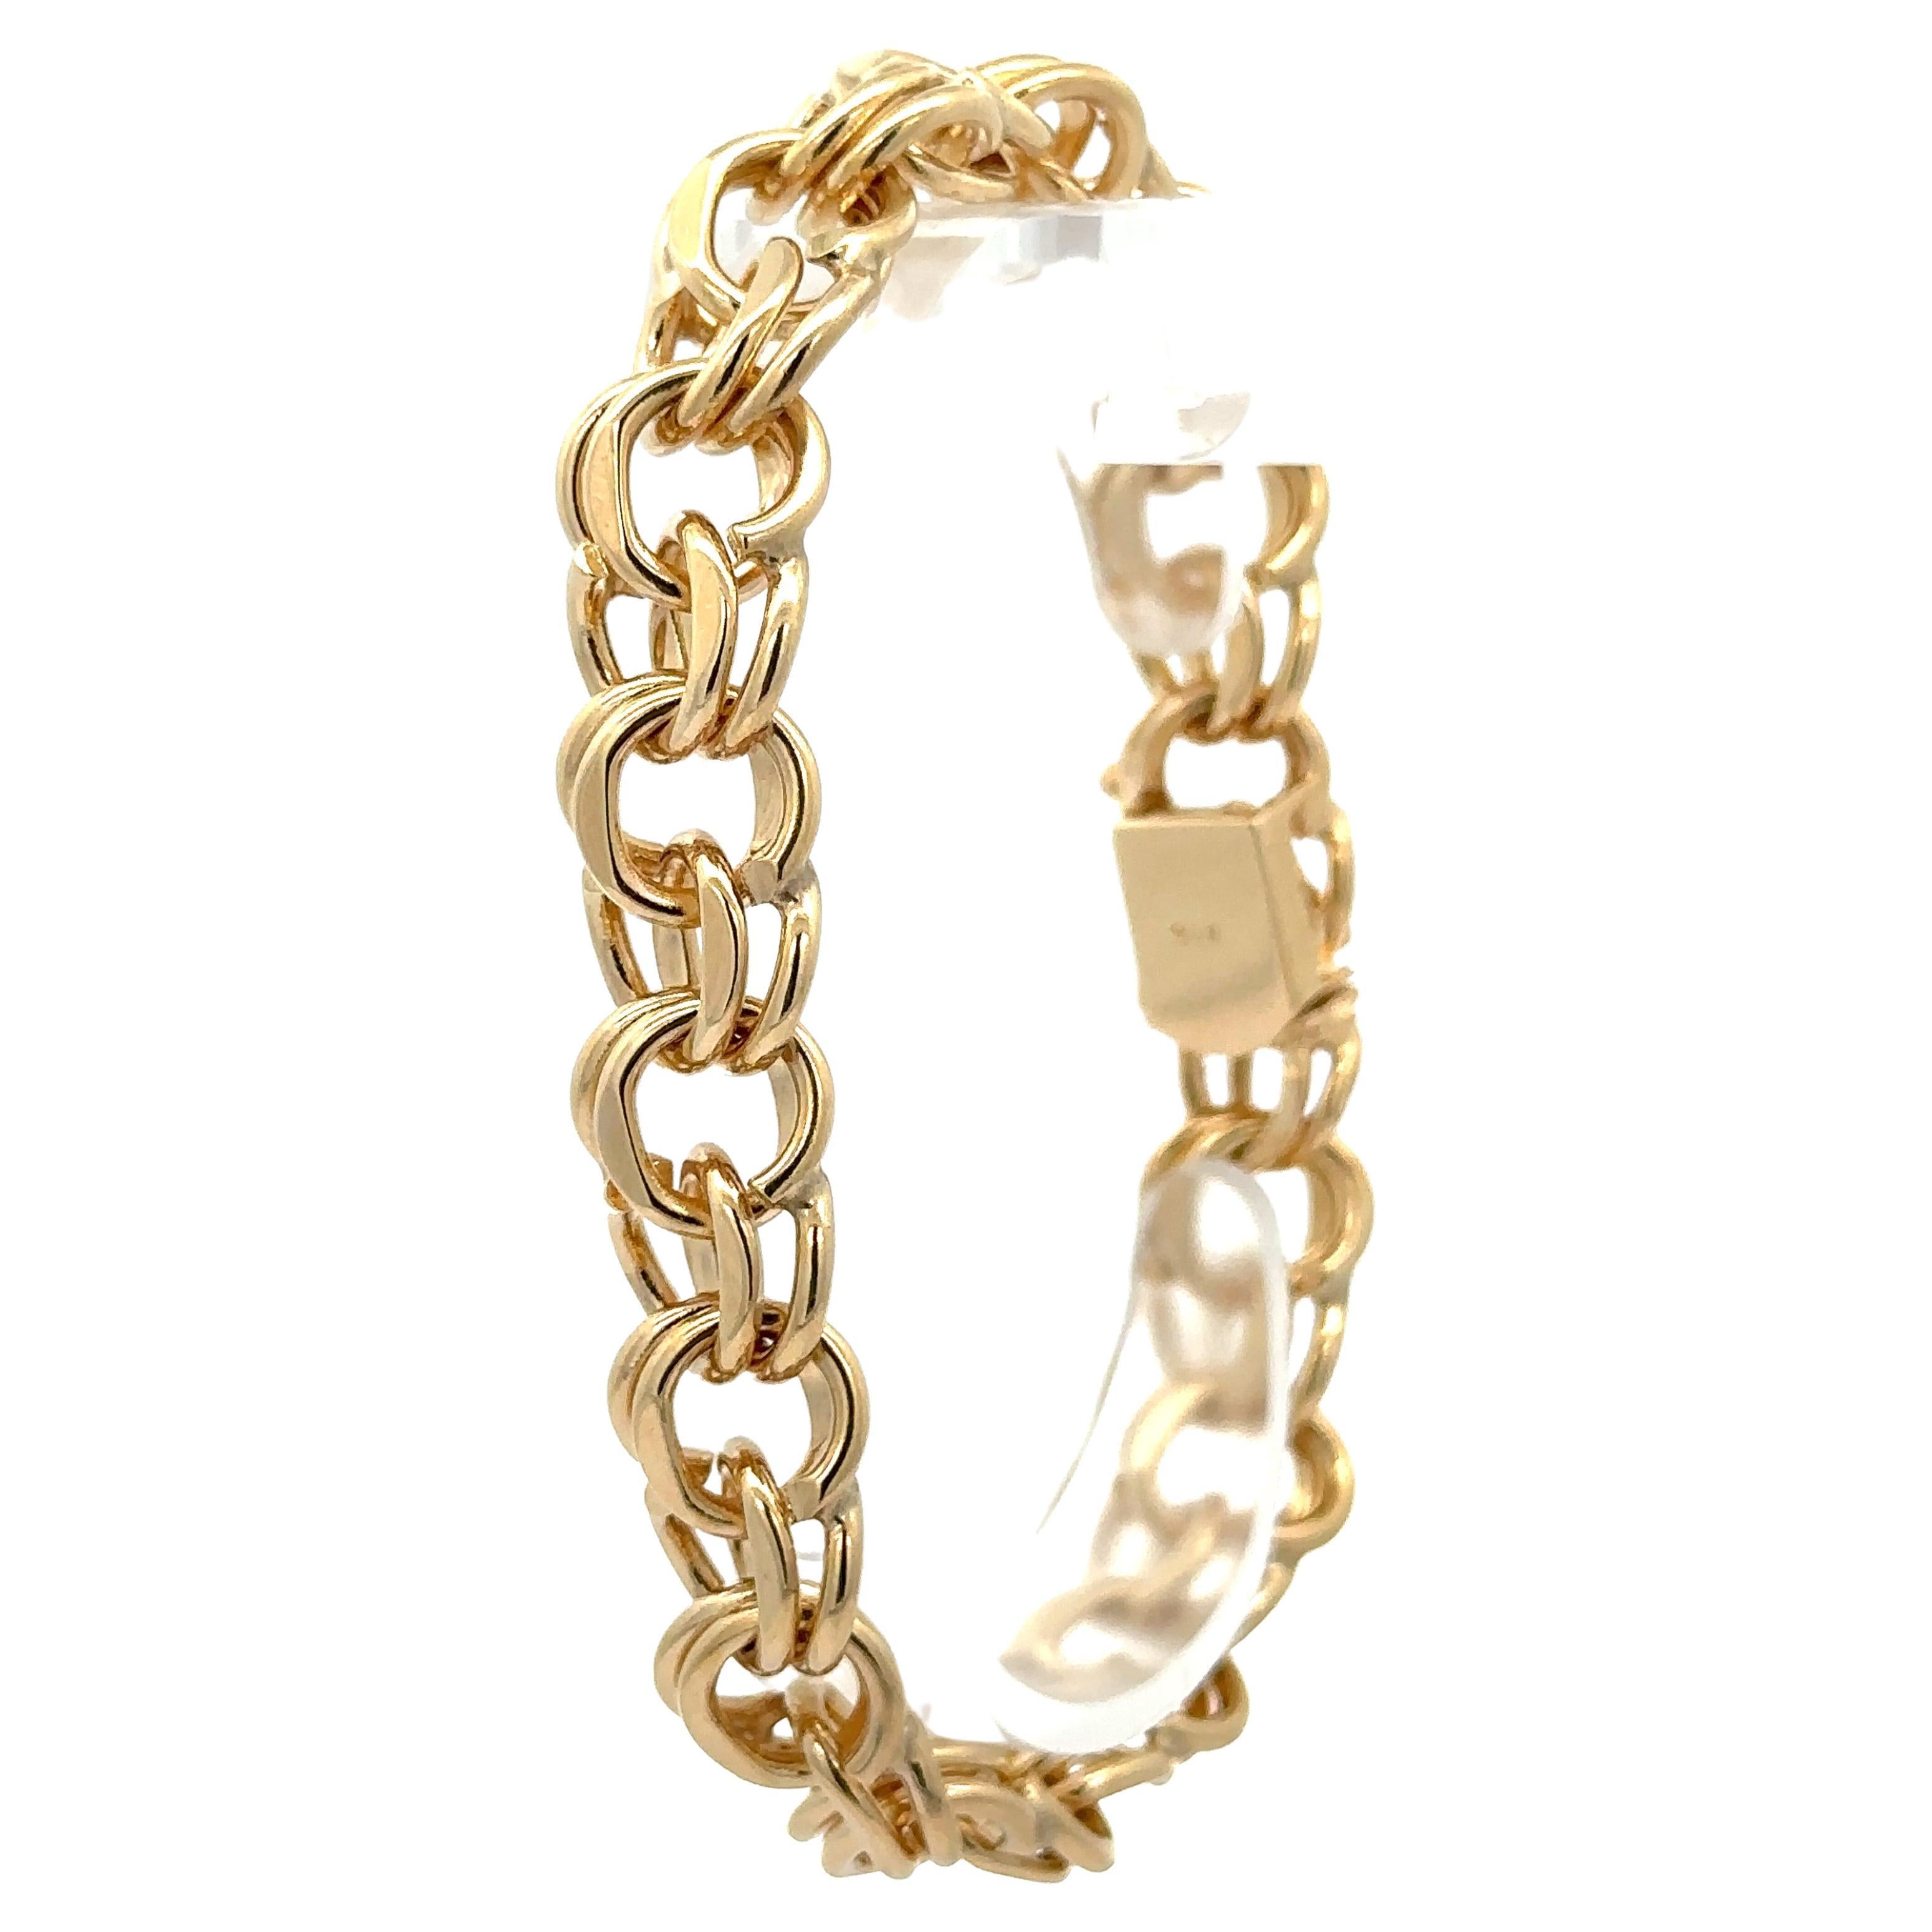 Vintage Solid 14K Yellow Gold 7.5" Polished Dual Curb Link Charm Chain Bracelet